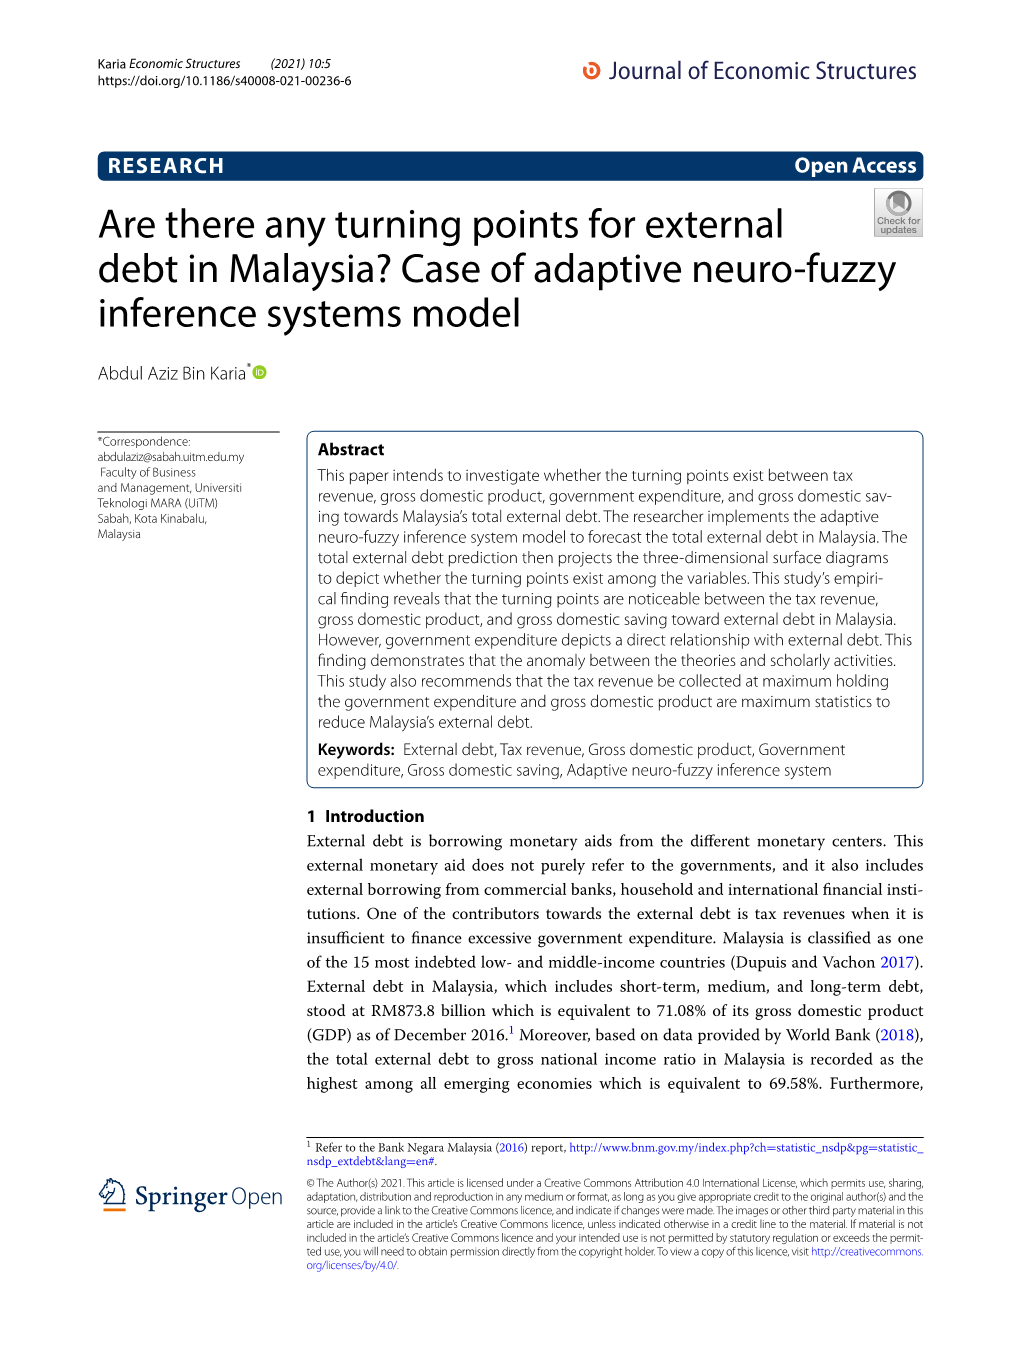 Case of Adaptive Neuro-Fuzzy Inference Systems Model